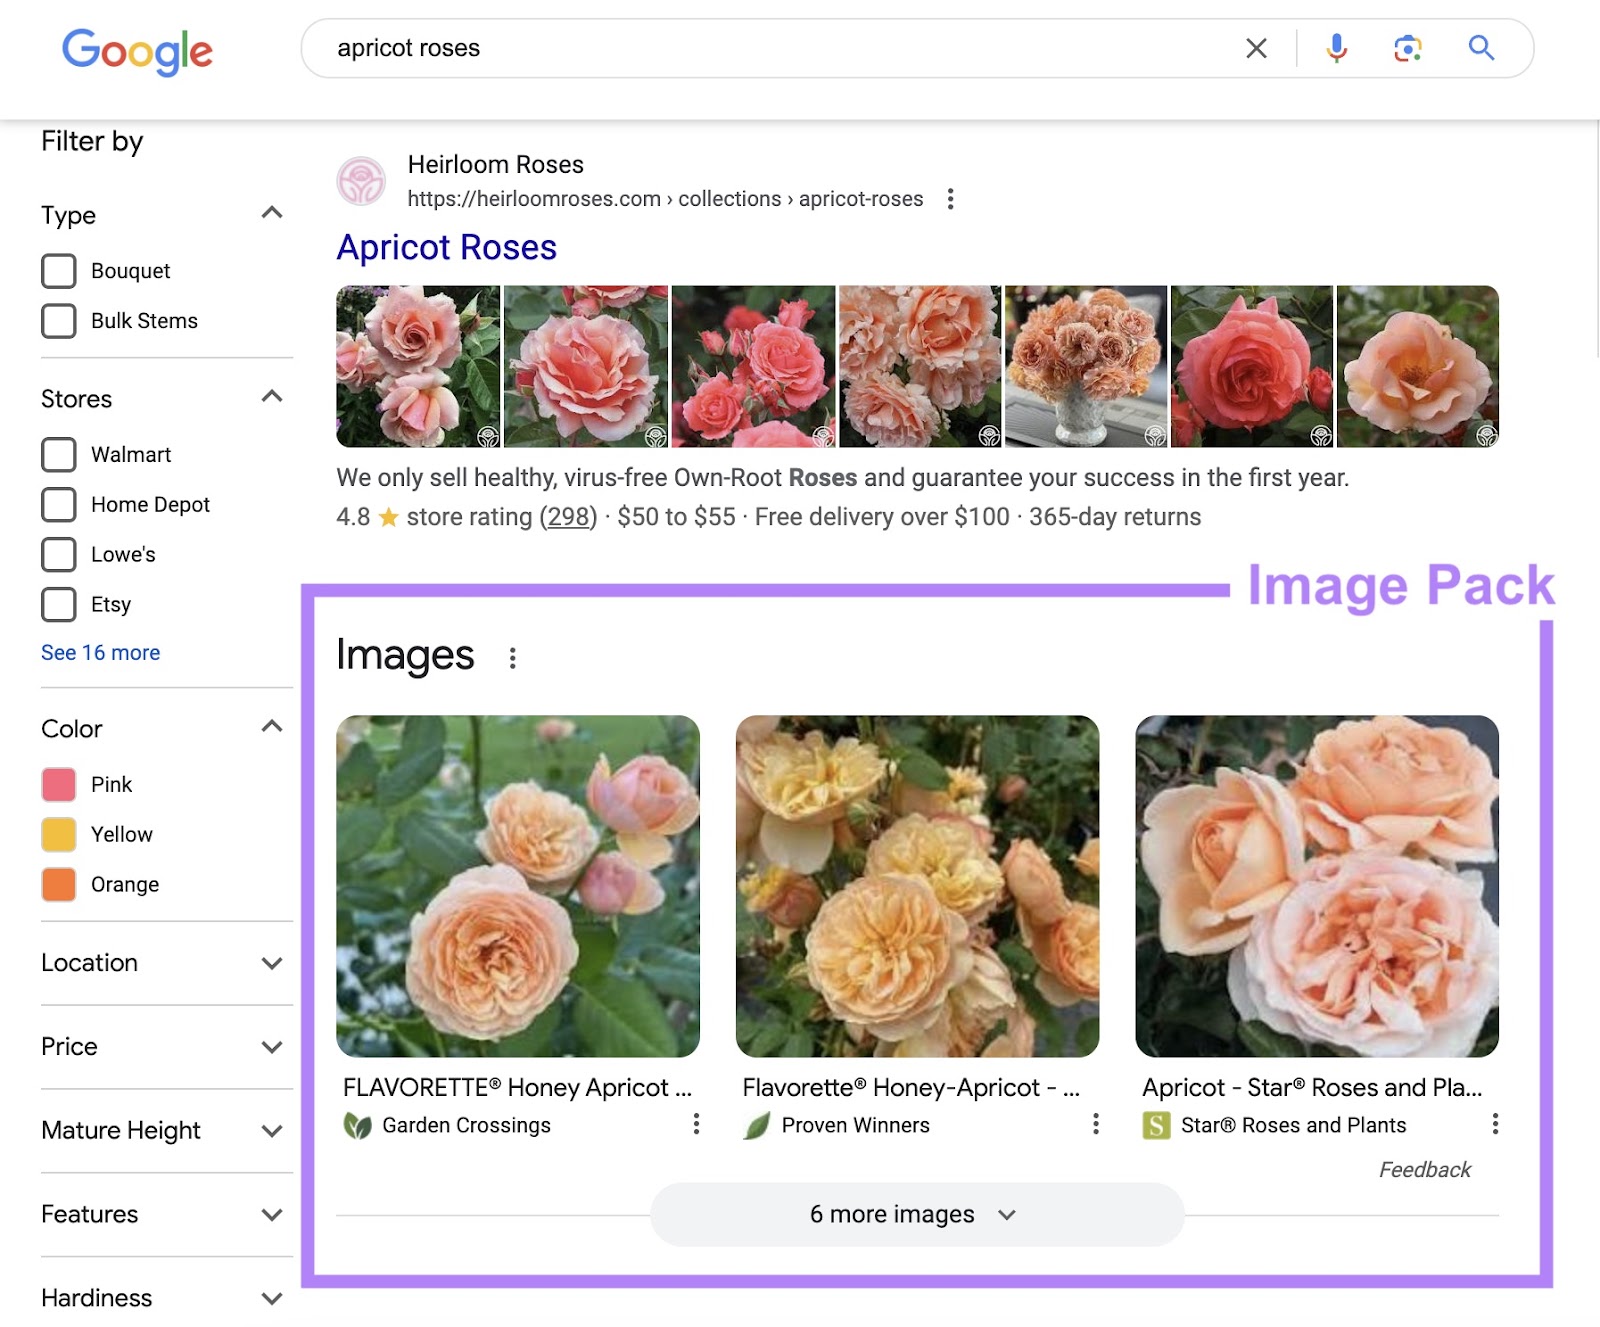 Image pack in serp shows three images of apricot roses